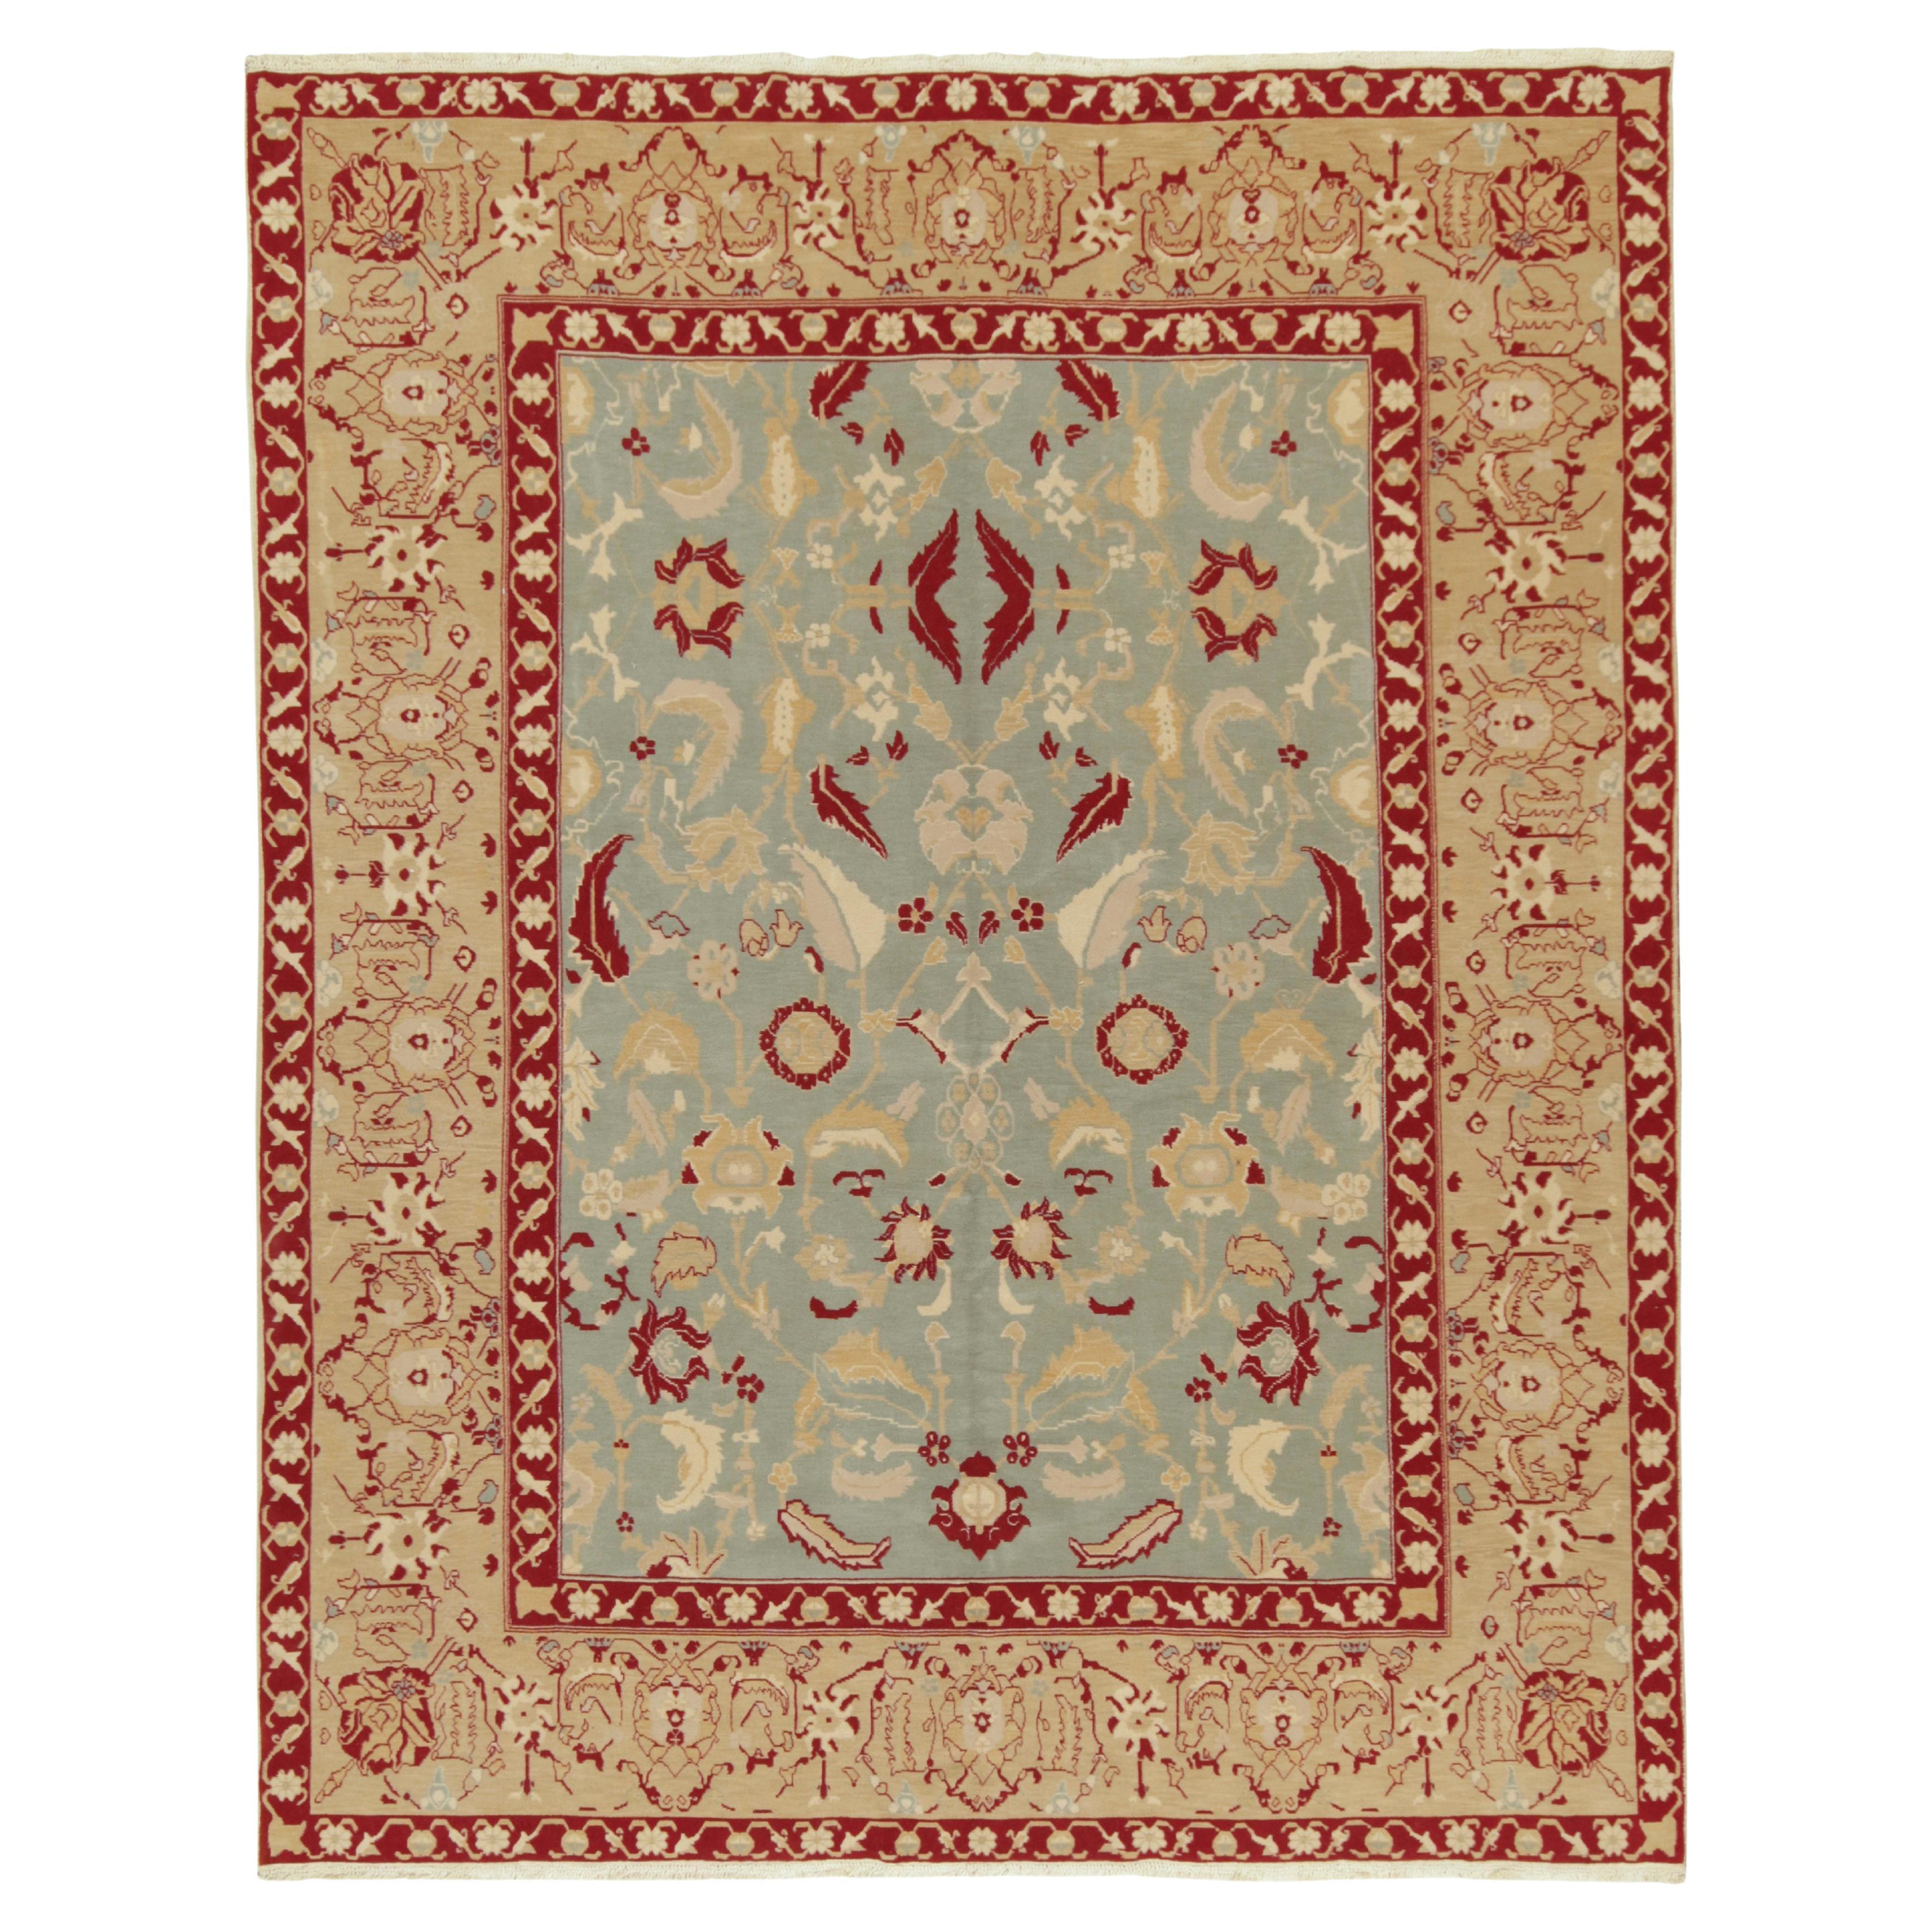 Rug & Kilim’s Classic Agra style rug in Blue with Red and Gold Floral Patterns